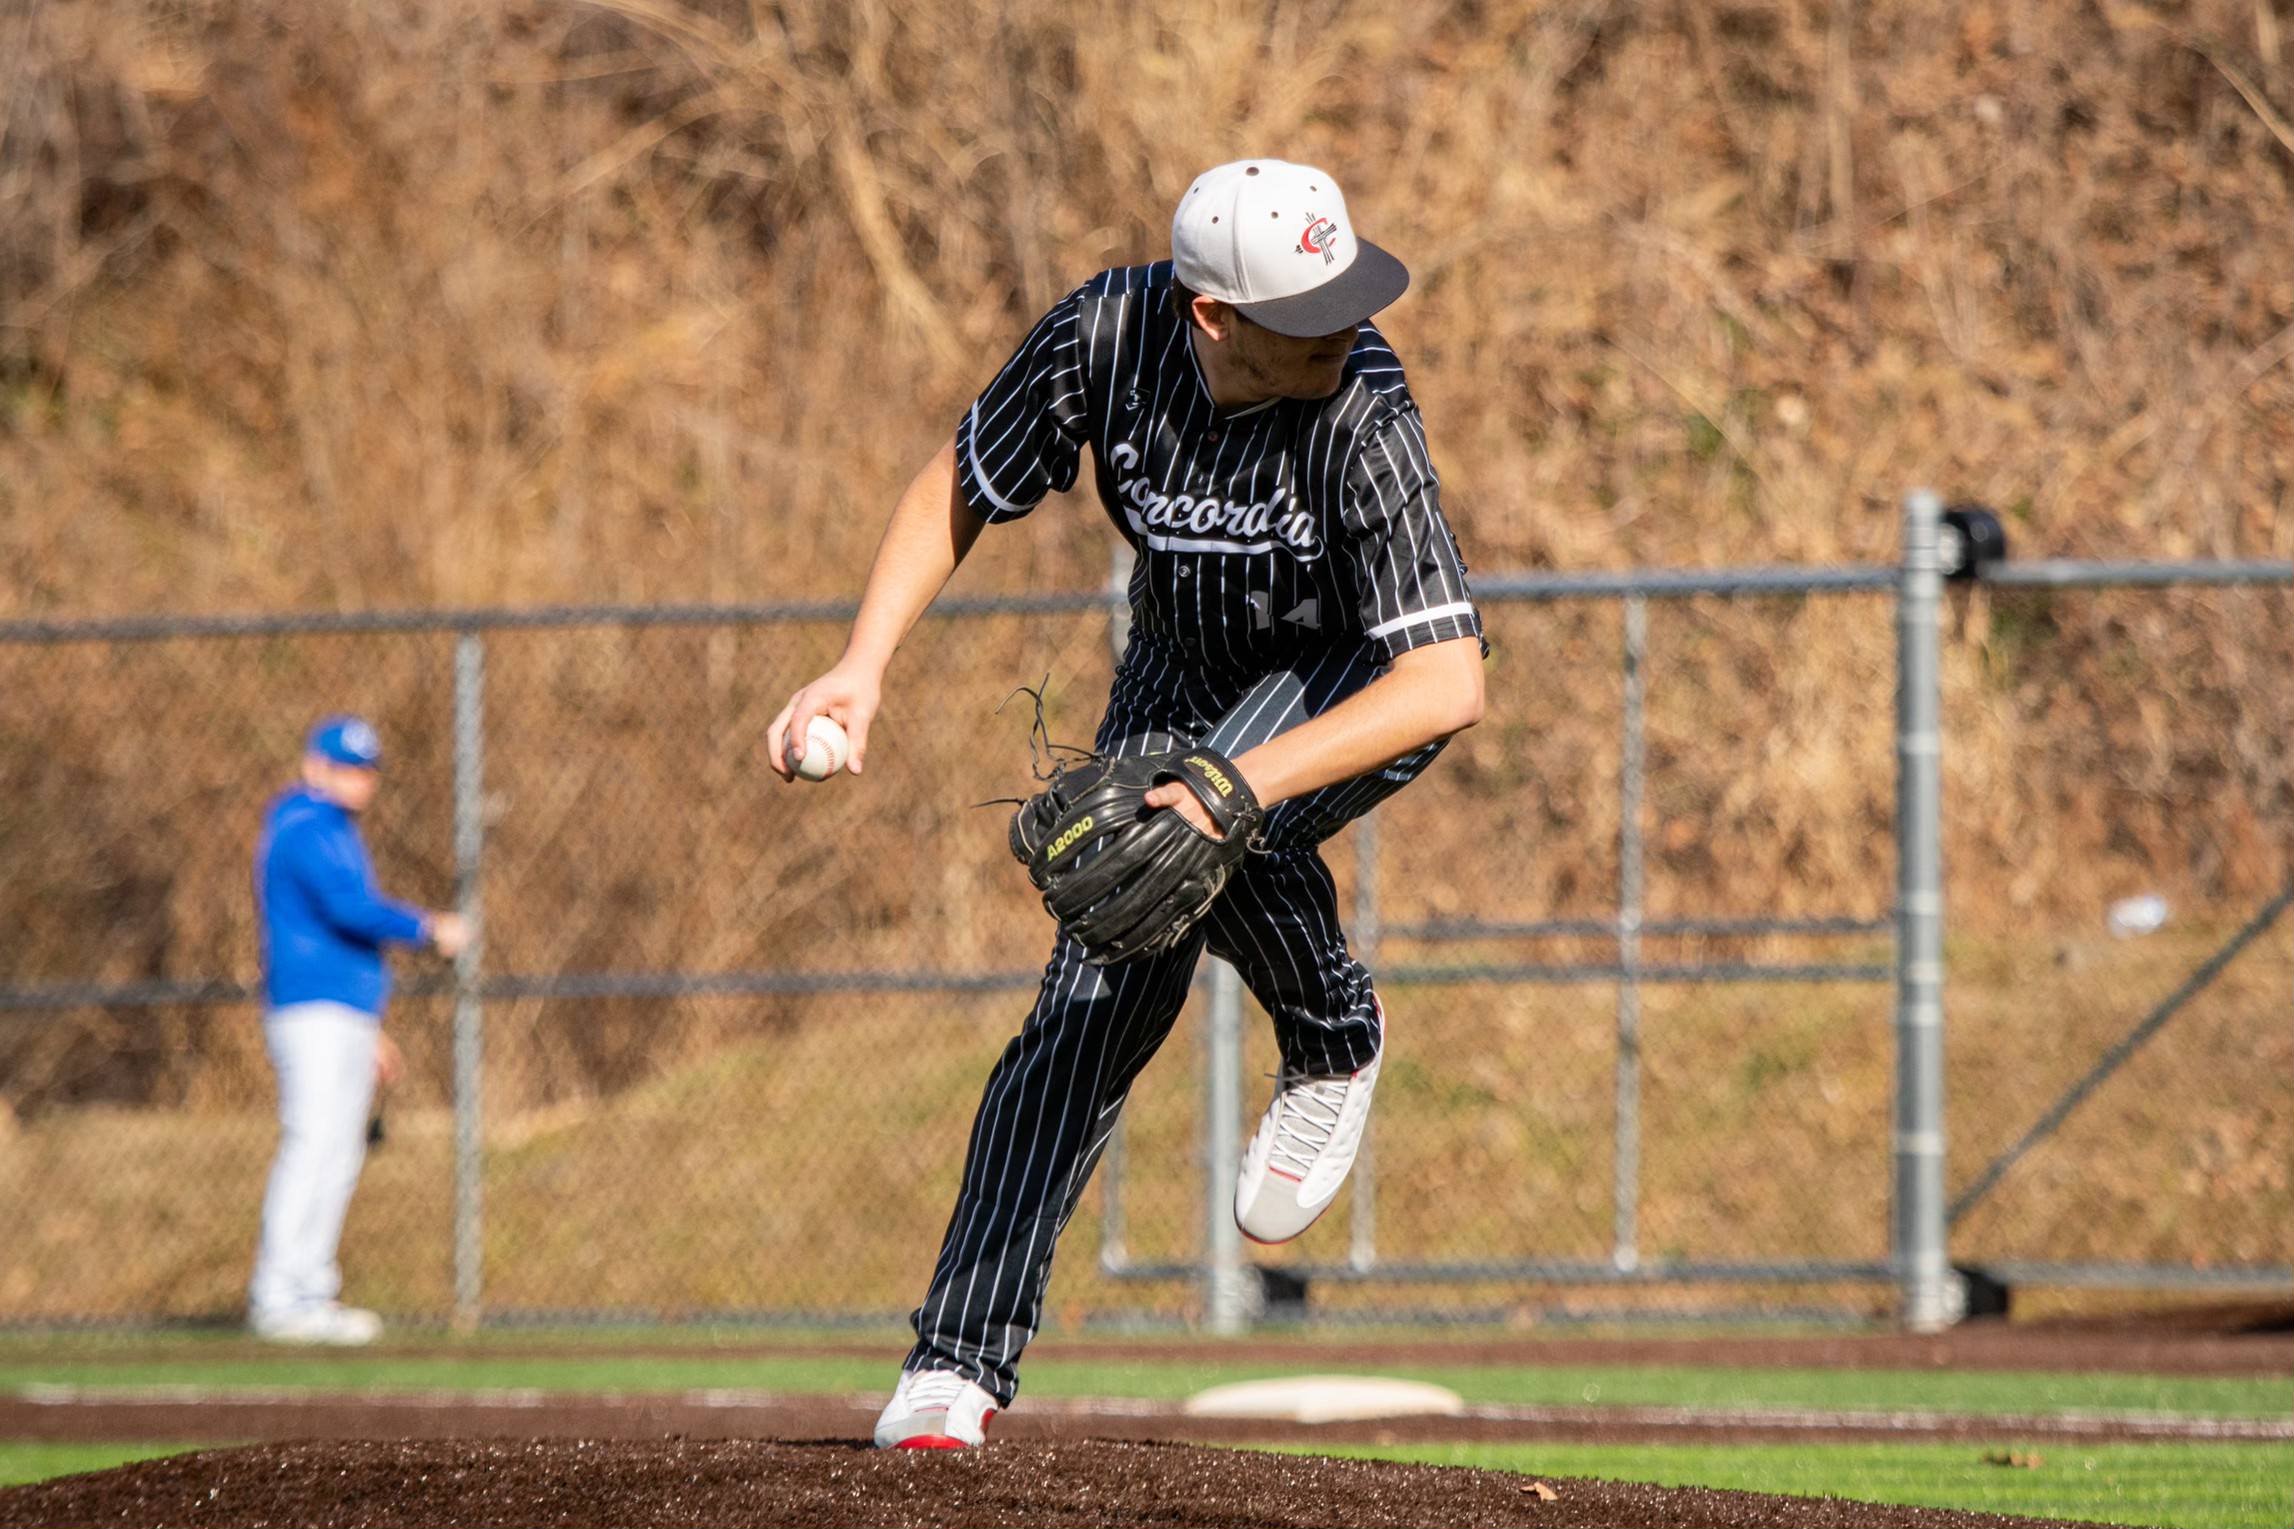 Baseball takes three on the weekend for Shawnee State